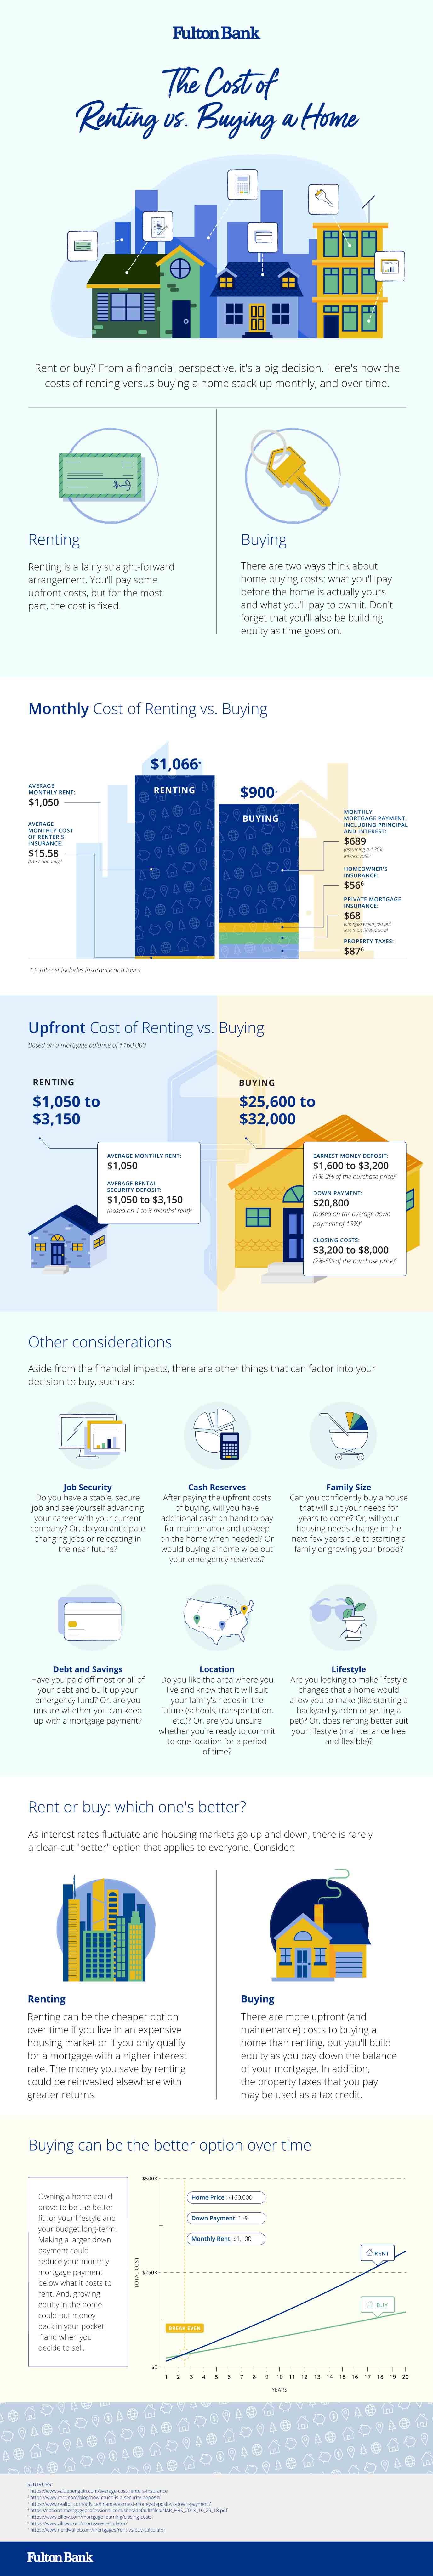 Renting vs. Buying cost comparison infographic